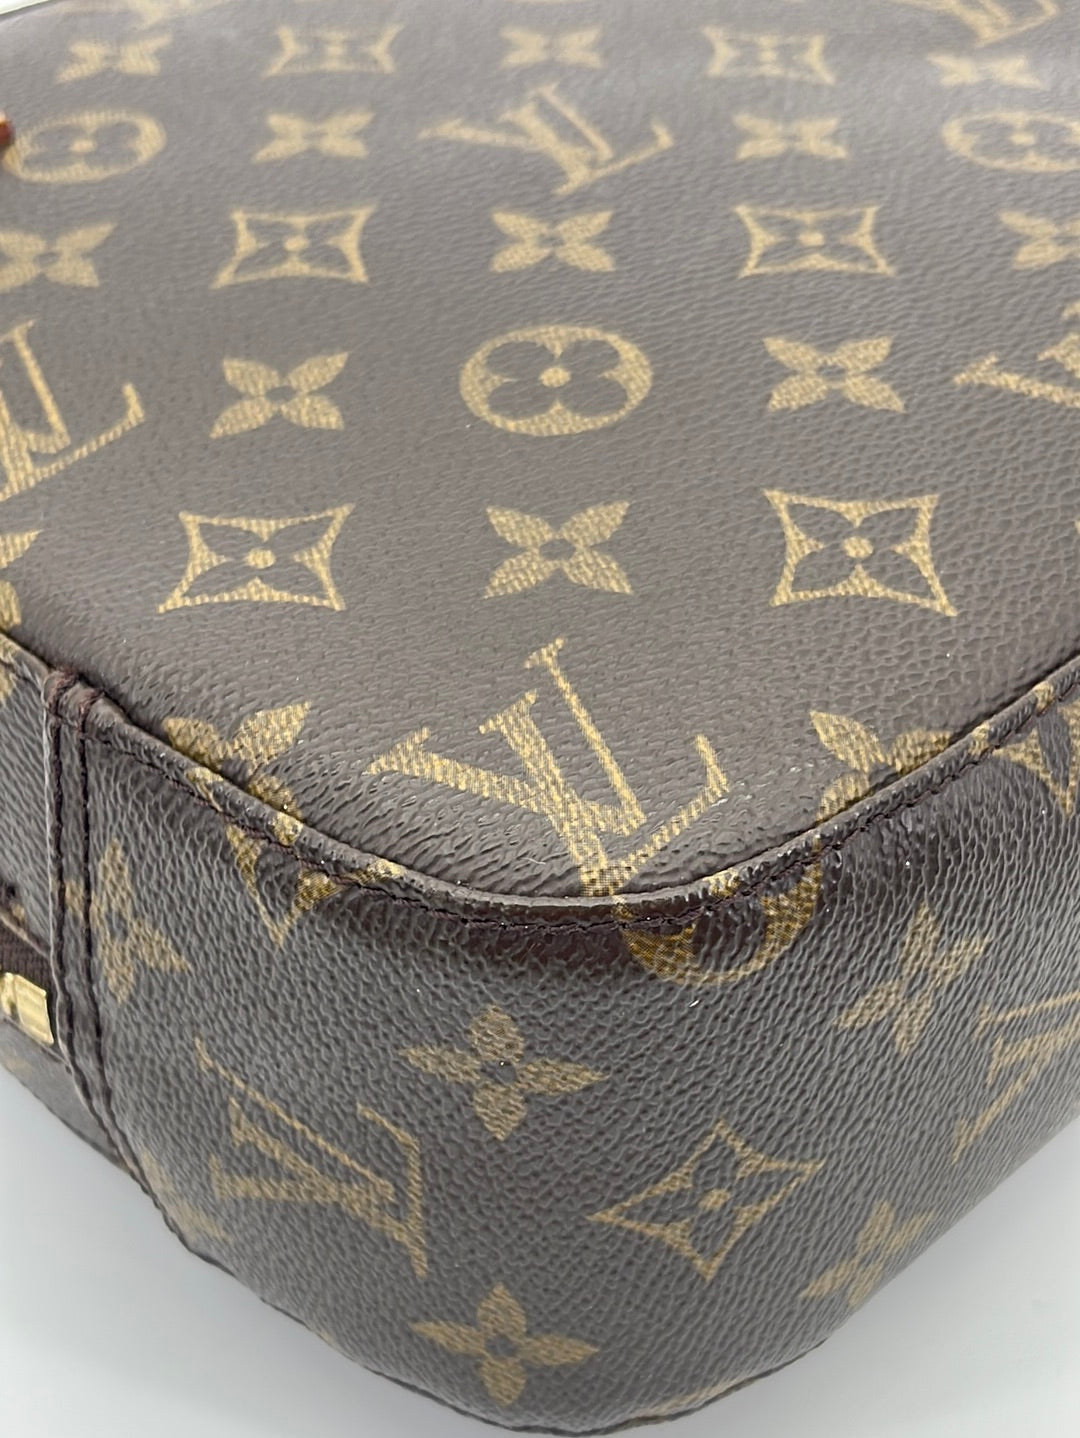 Louis Vuitton 2003 pre-owned Spontini two-way bag - ShopStyle